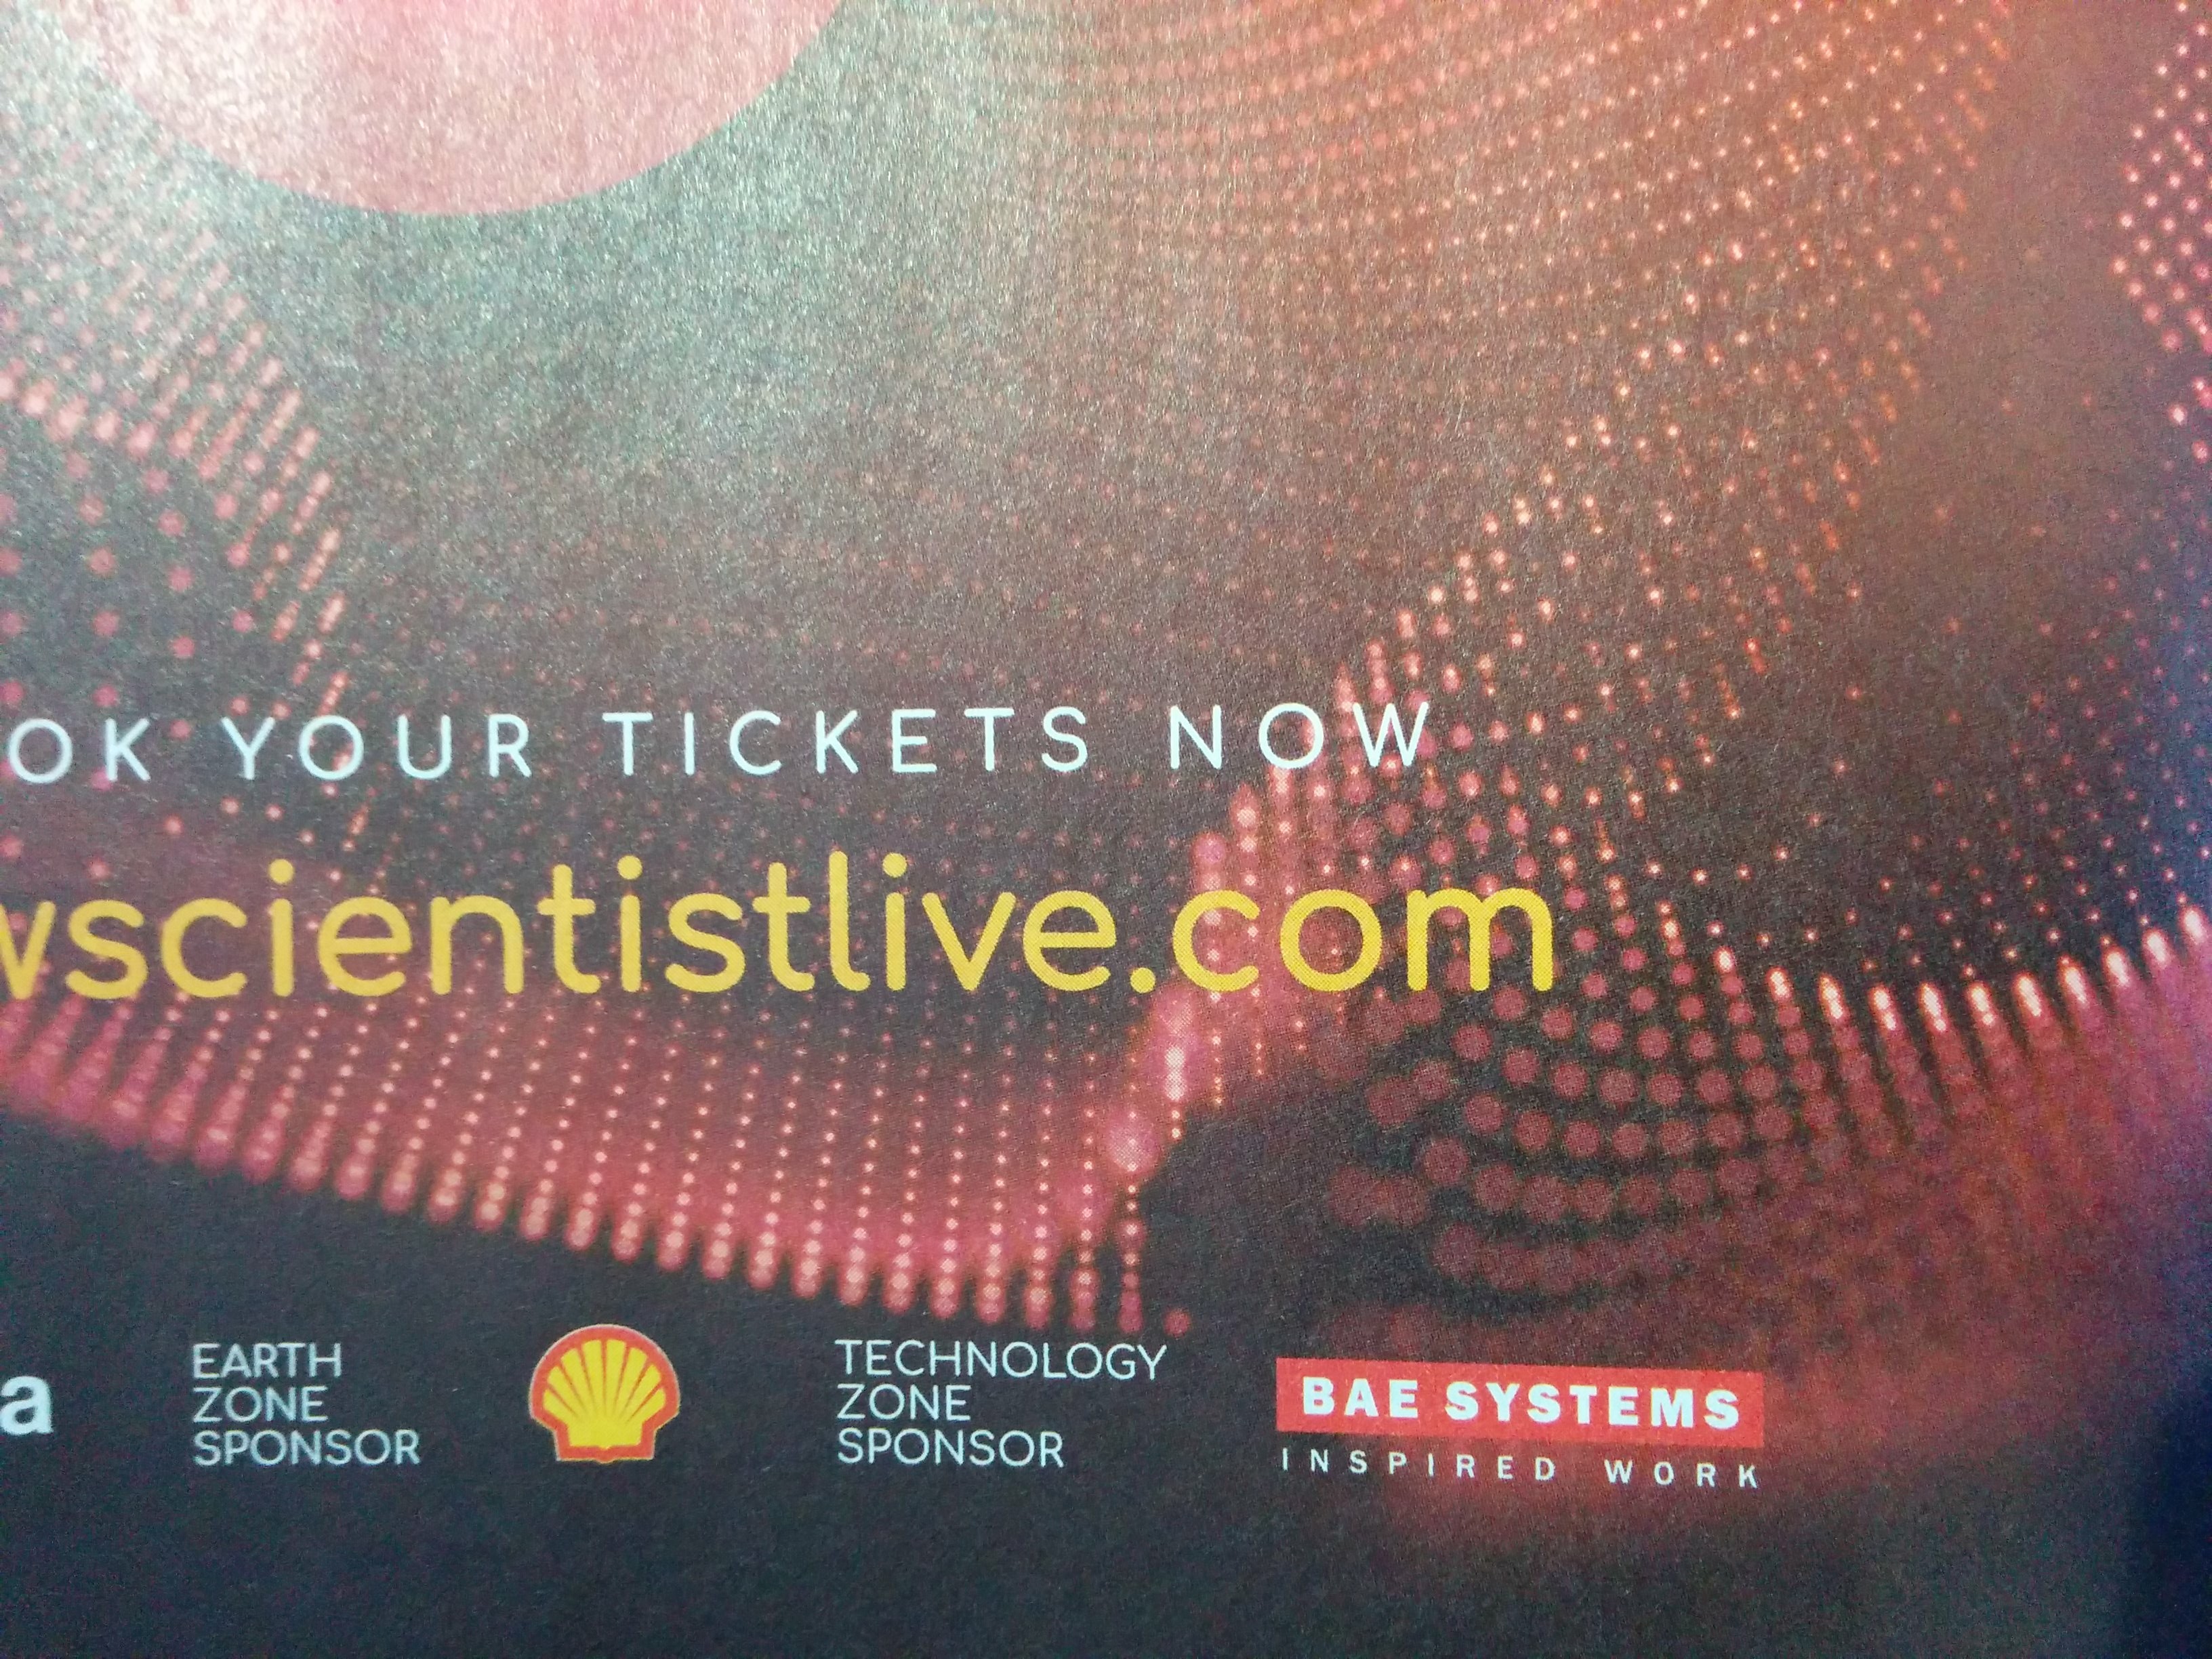 Detail of New Scientist's sponsors for their New Scientist Live conference: Earth Zone Sponsor: Shell, Technology Zone Sponsor: BAE Systems.